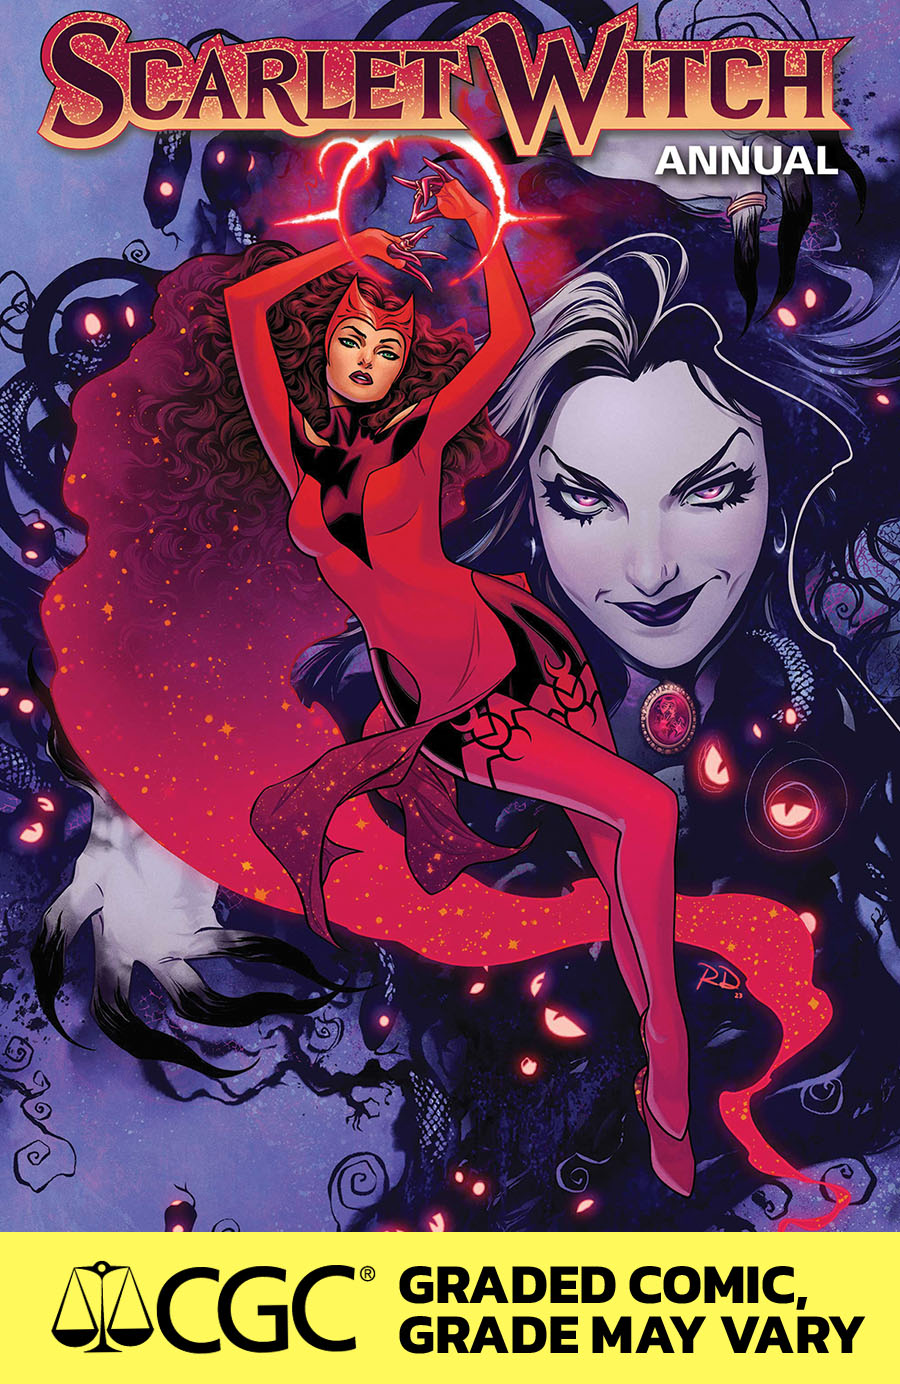 Scarlet Witch Vol 3 Annual #1 Cover F DF CGC Graded (Contest Of Chaos Tie-In)